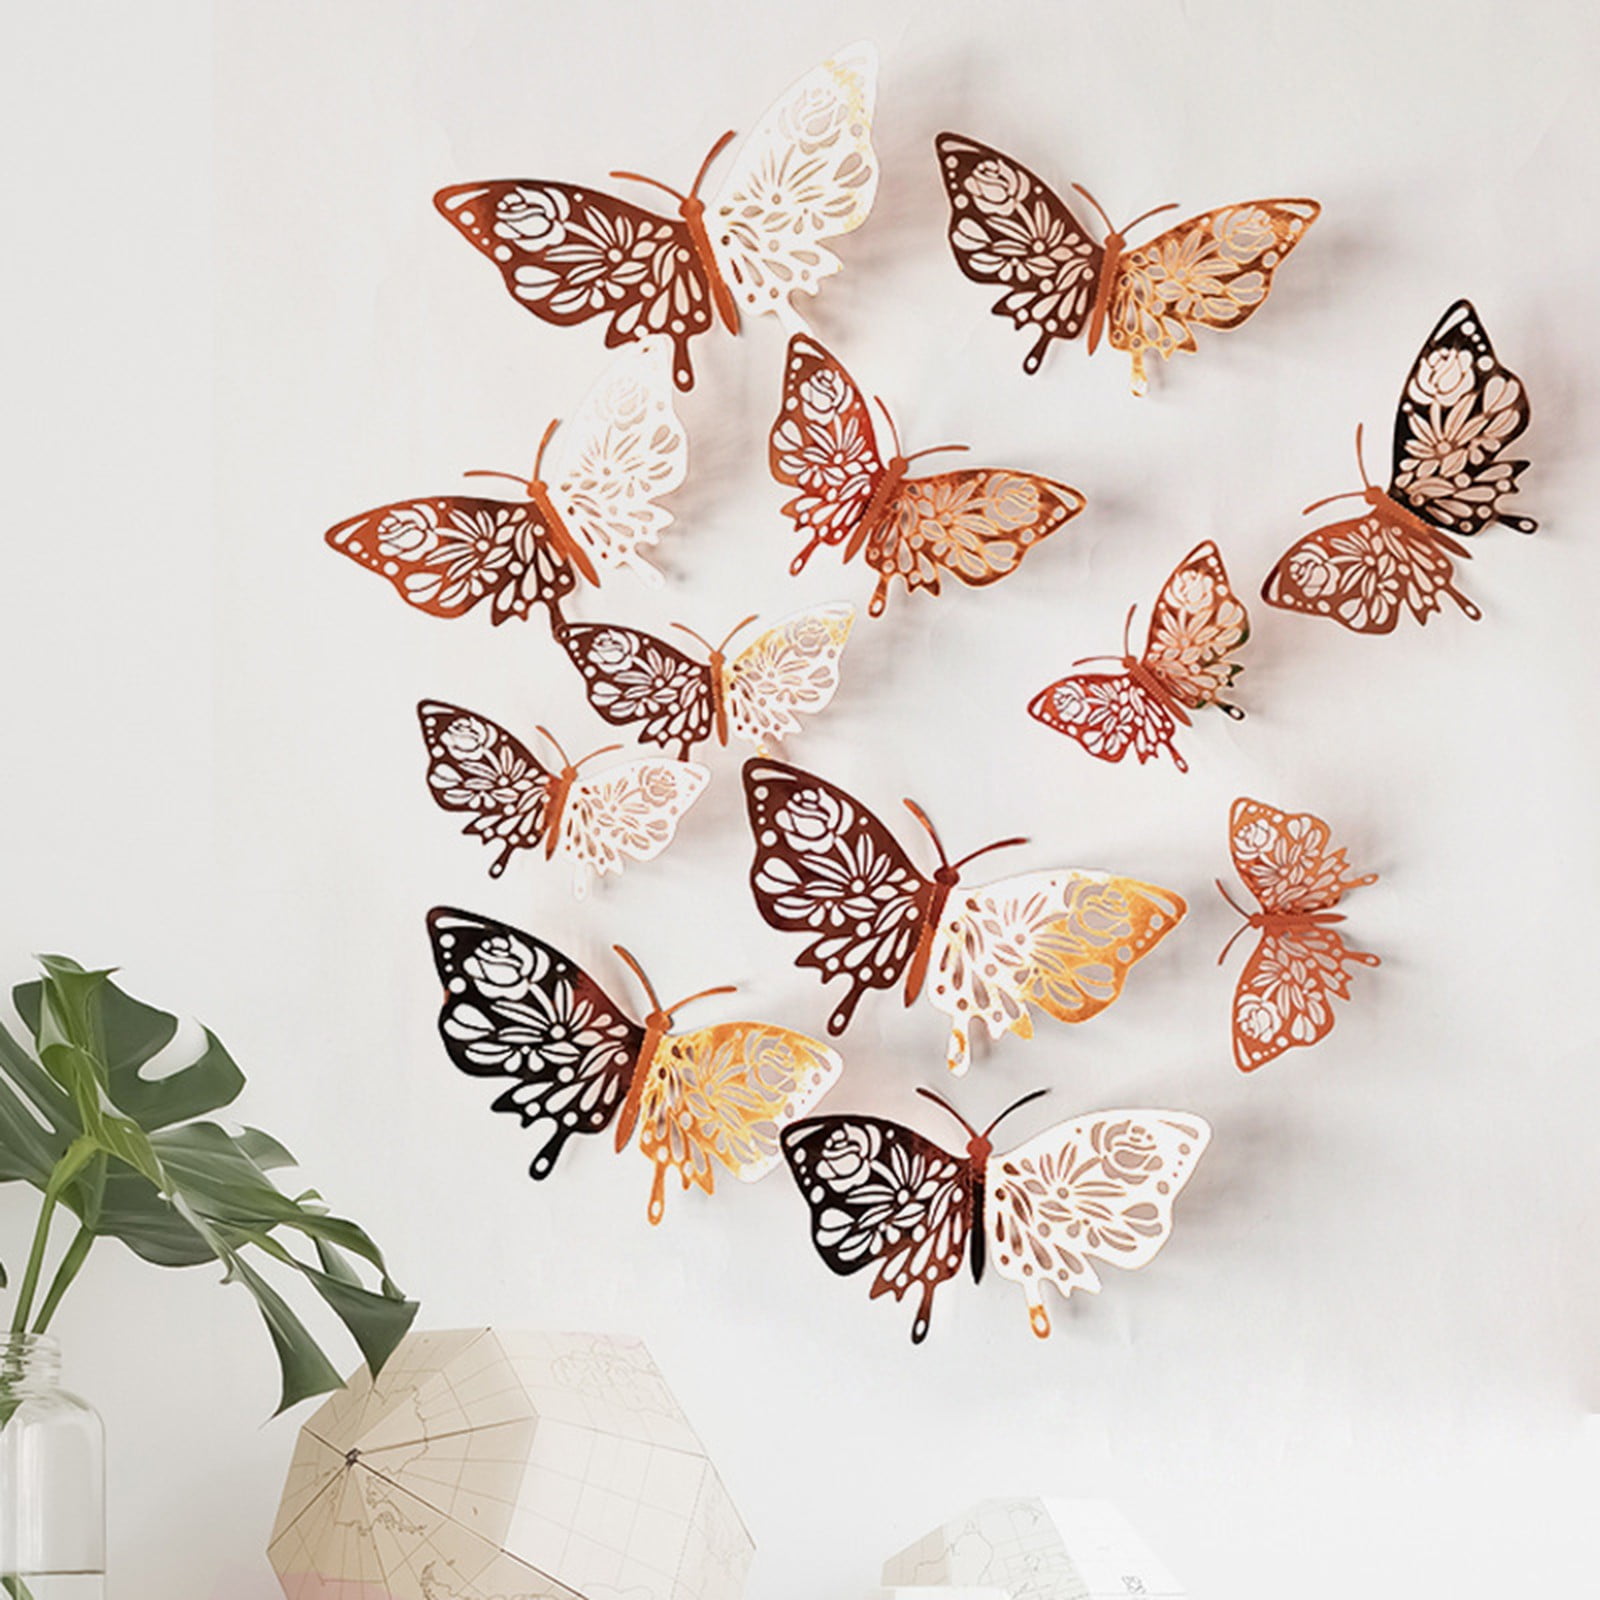 Party Cake Decoration Home Decoration Living Room Bedroom Sweet Unique Gifts 12 Pc 3D Hollow Butterfly Wall Decoration 3 Size Butterfly Decoration Hollow Carving Exquisite Design gold